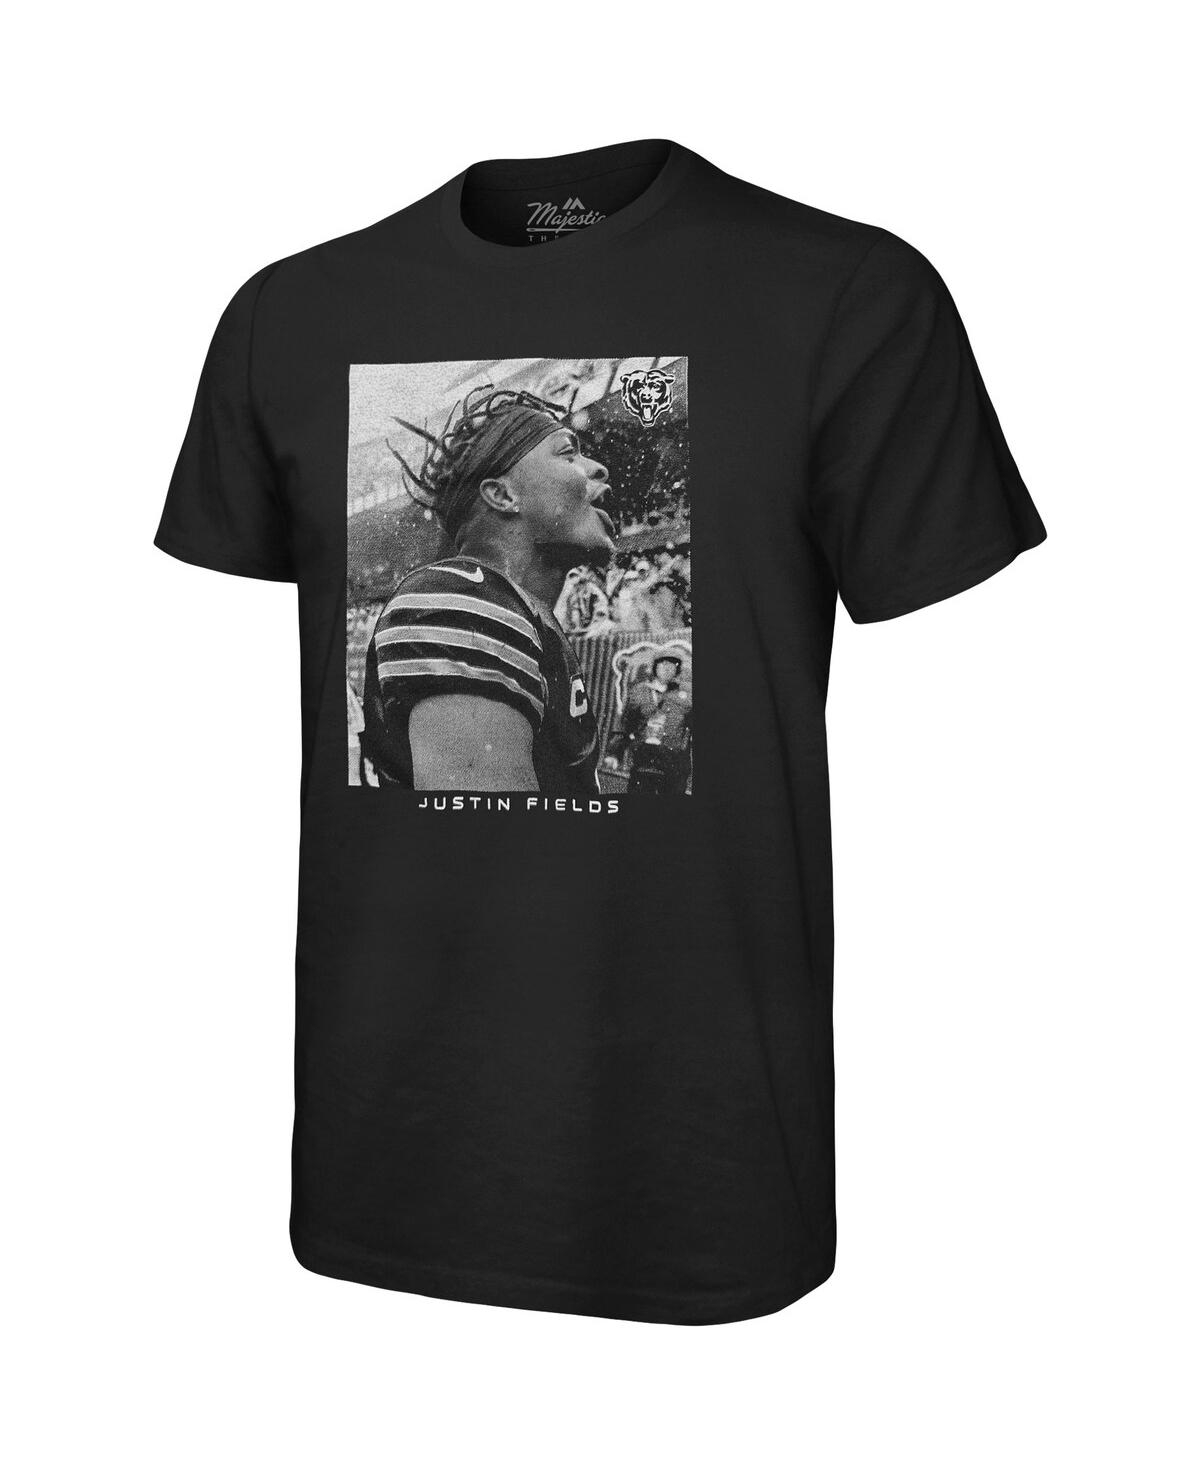 Shop Majestic Men's  Threads Justin Fields Black Chicago Bears Oversized Player Image T-shirt